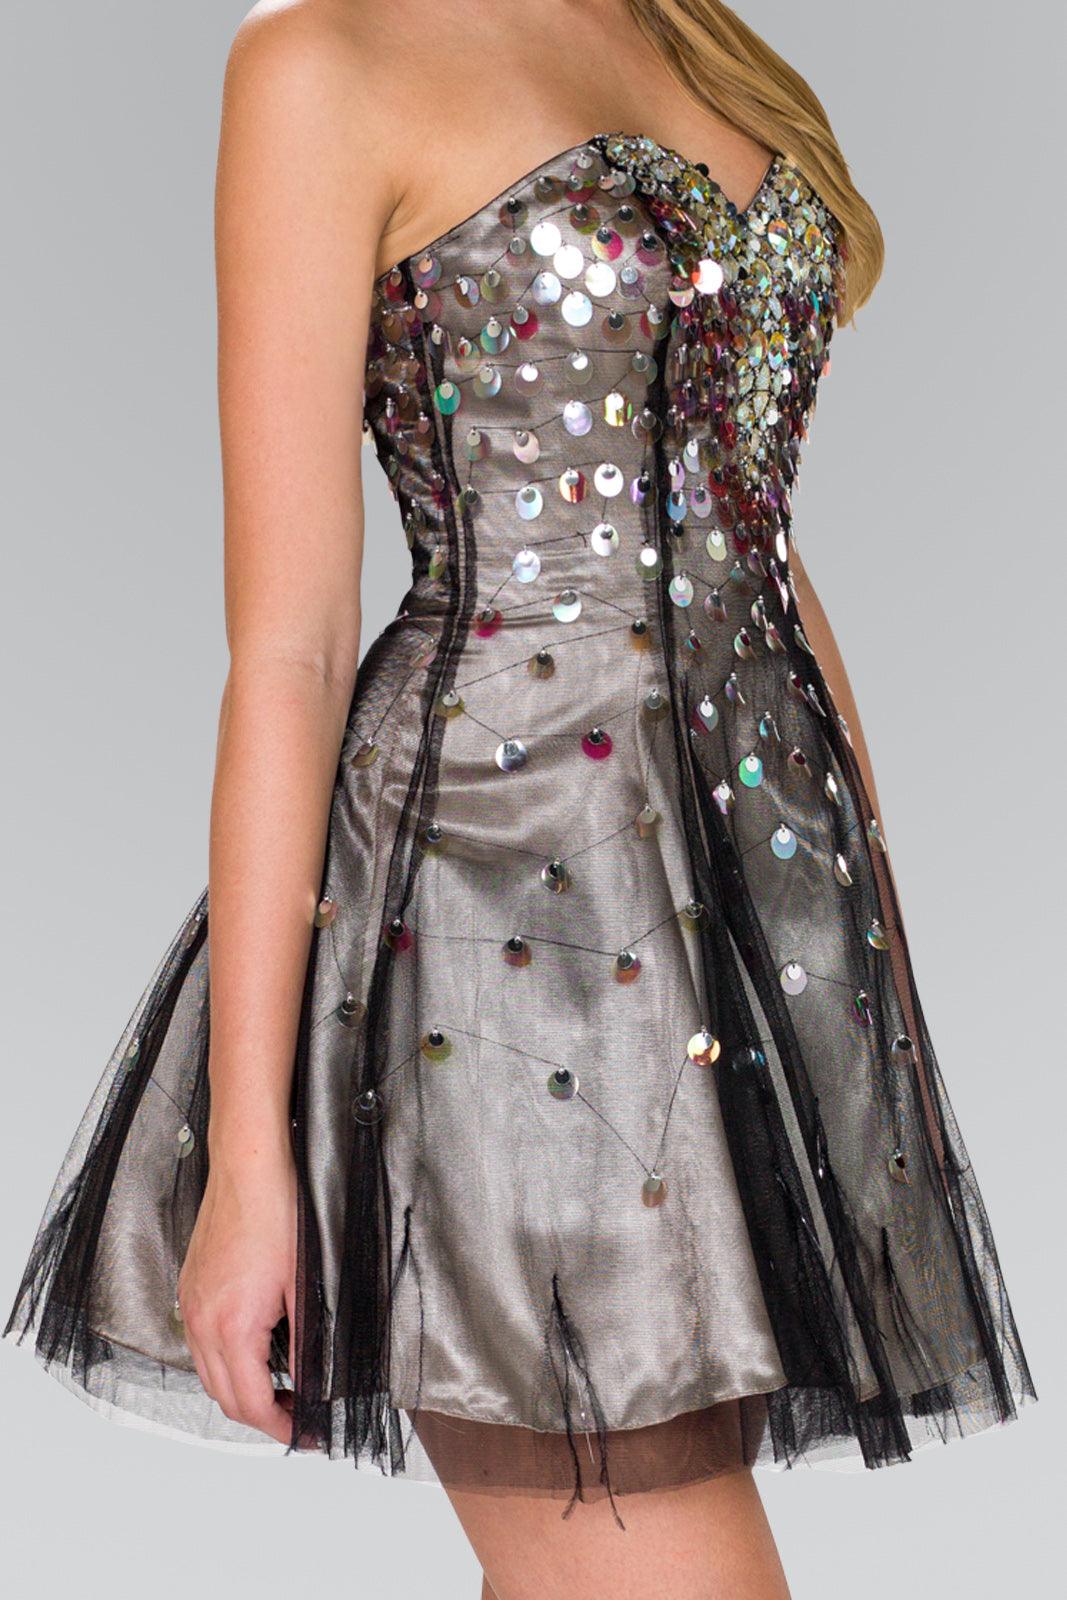 Strapless Sequined Short Prom Dress - The Dress Outlet